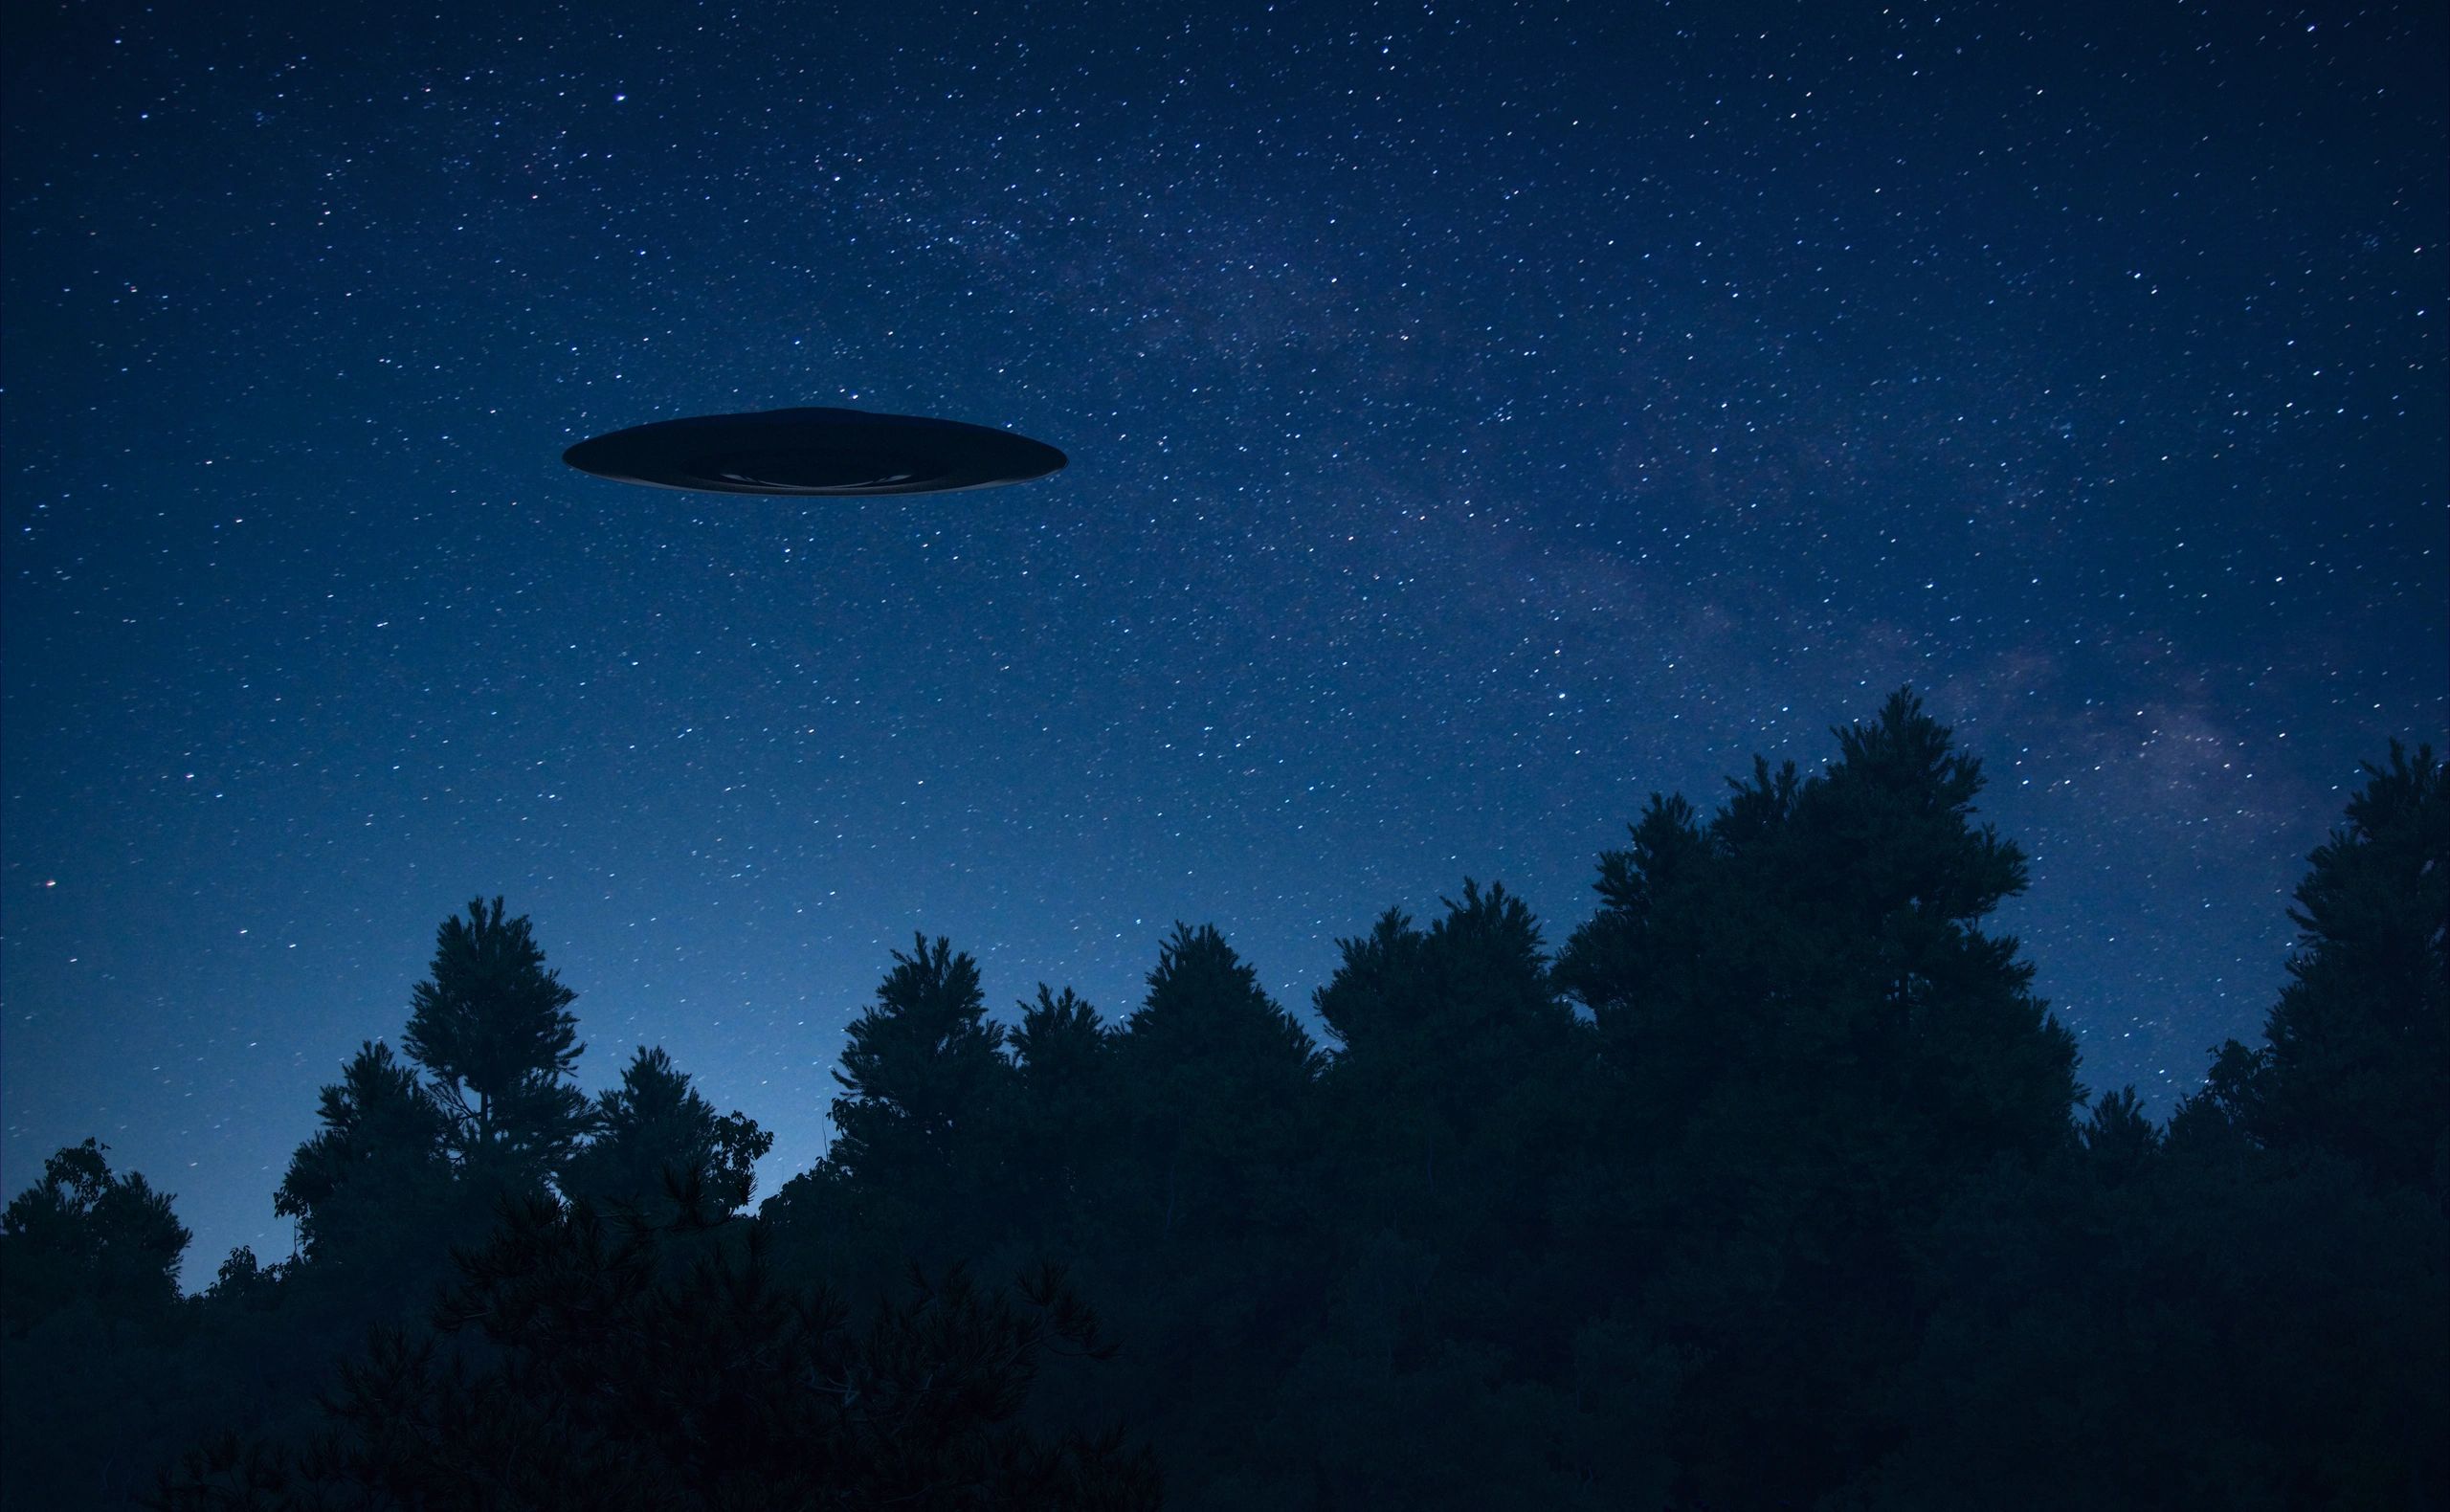 Saucer silouette hovers over trees against a backdrop of stars in the night sky.